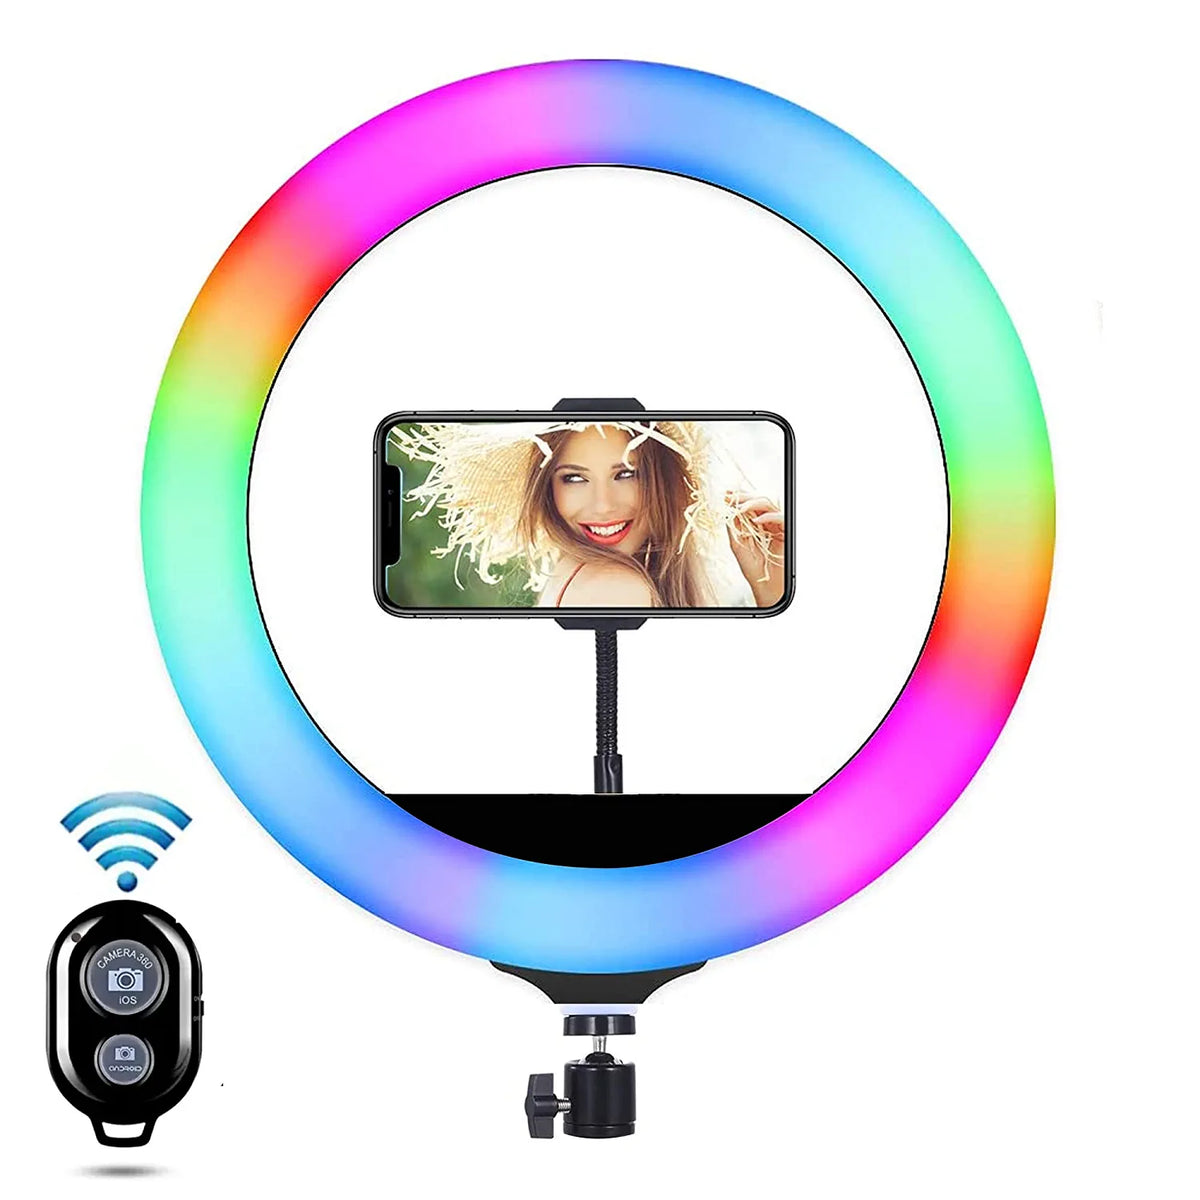 8-inch RGB RingLights with Mobile Phone Holder for Video Making